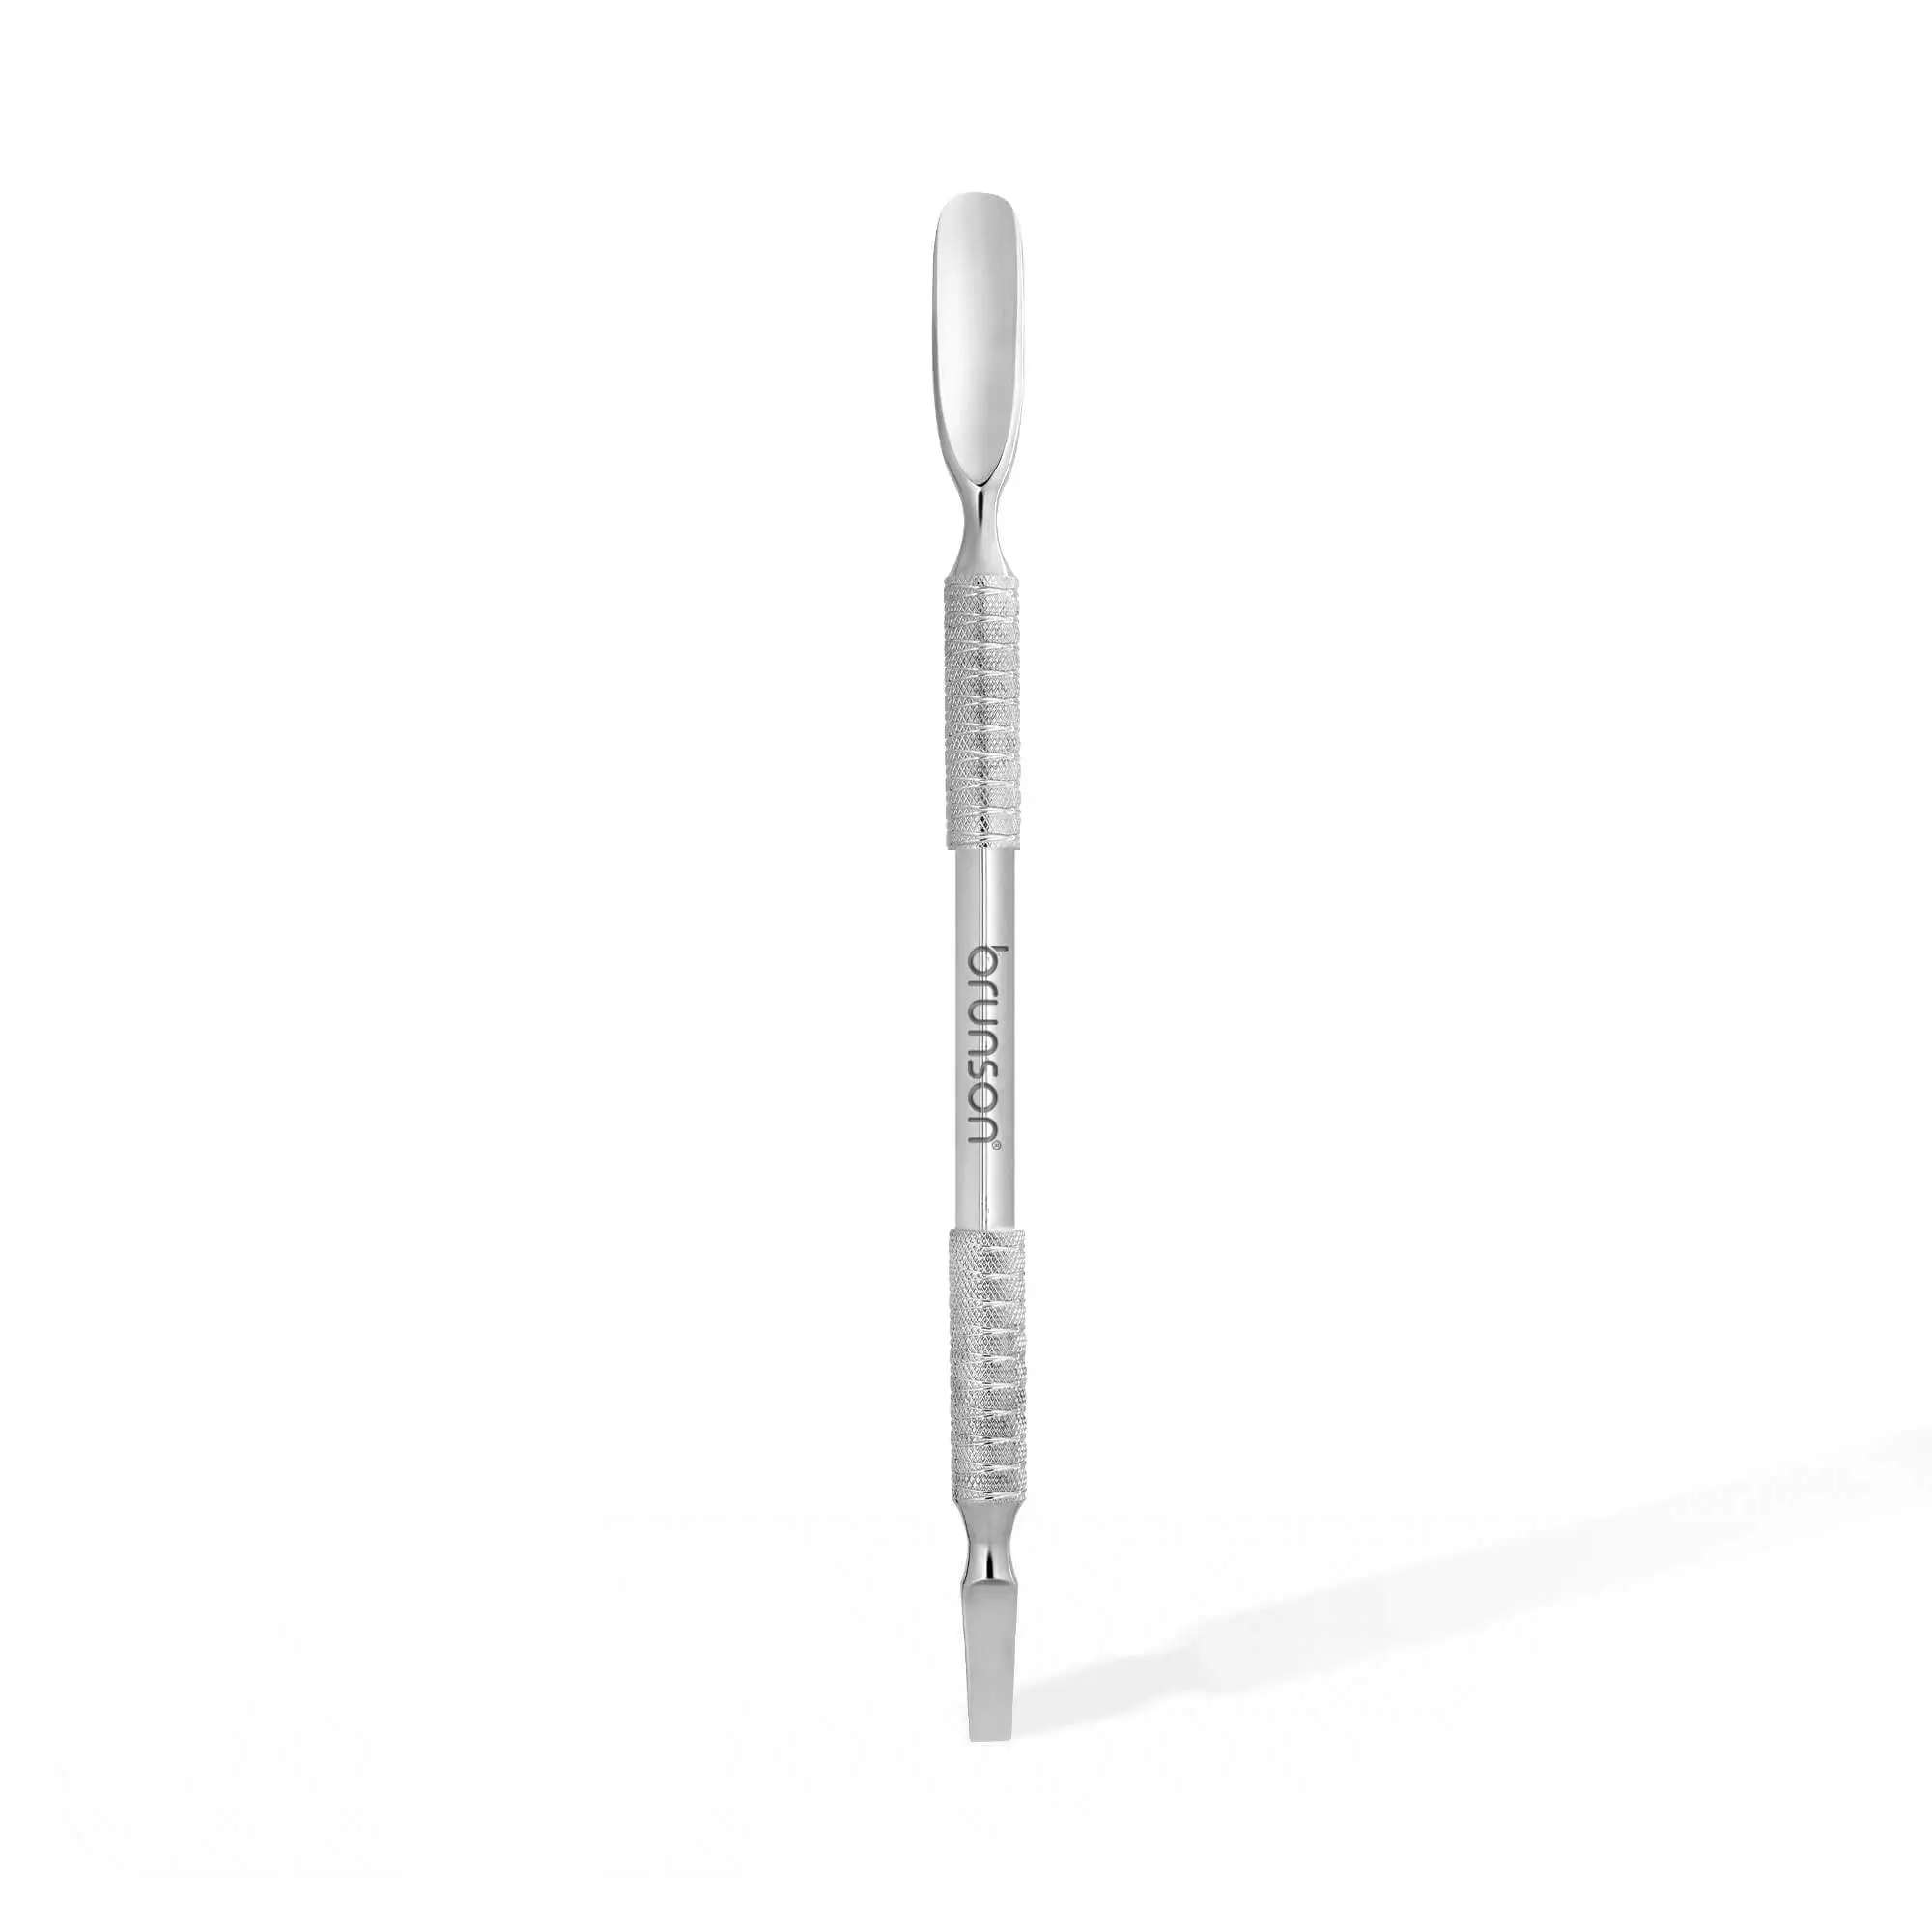 Cuticle-Pusher-Double-Sided-Cuticle-Curette-BHS-21-2